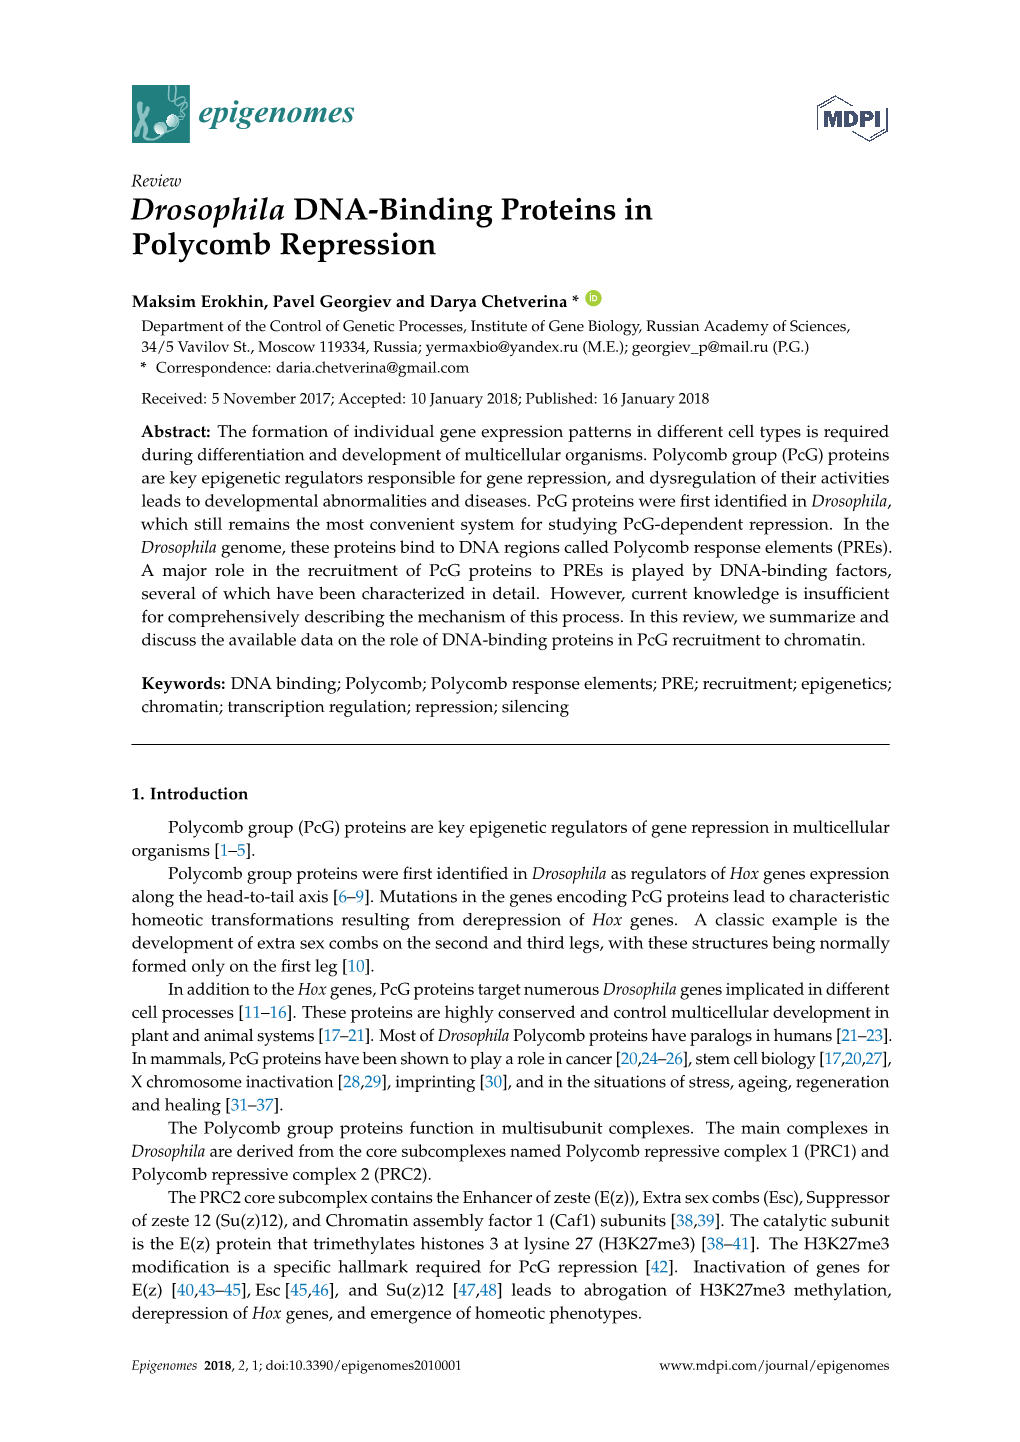 Drosophila DNA-Binding Proteins in Polycomb Repression